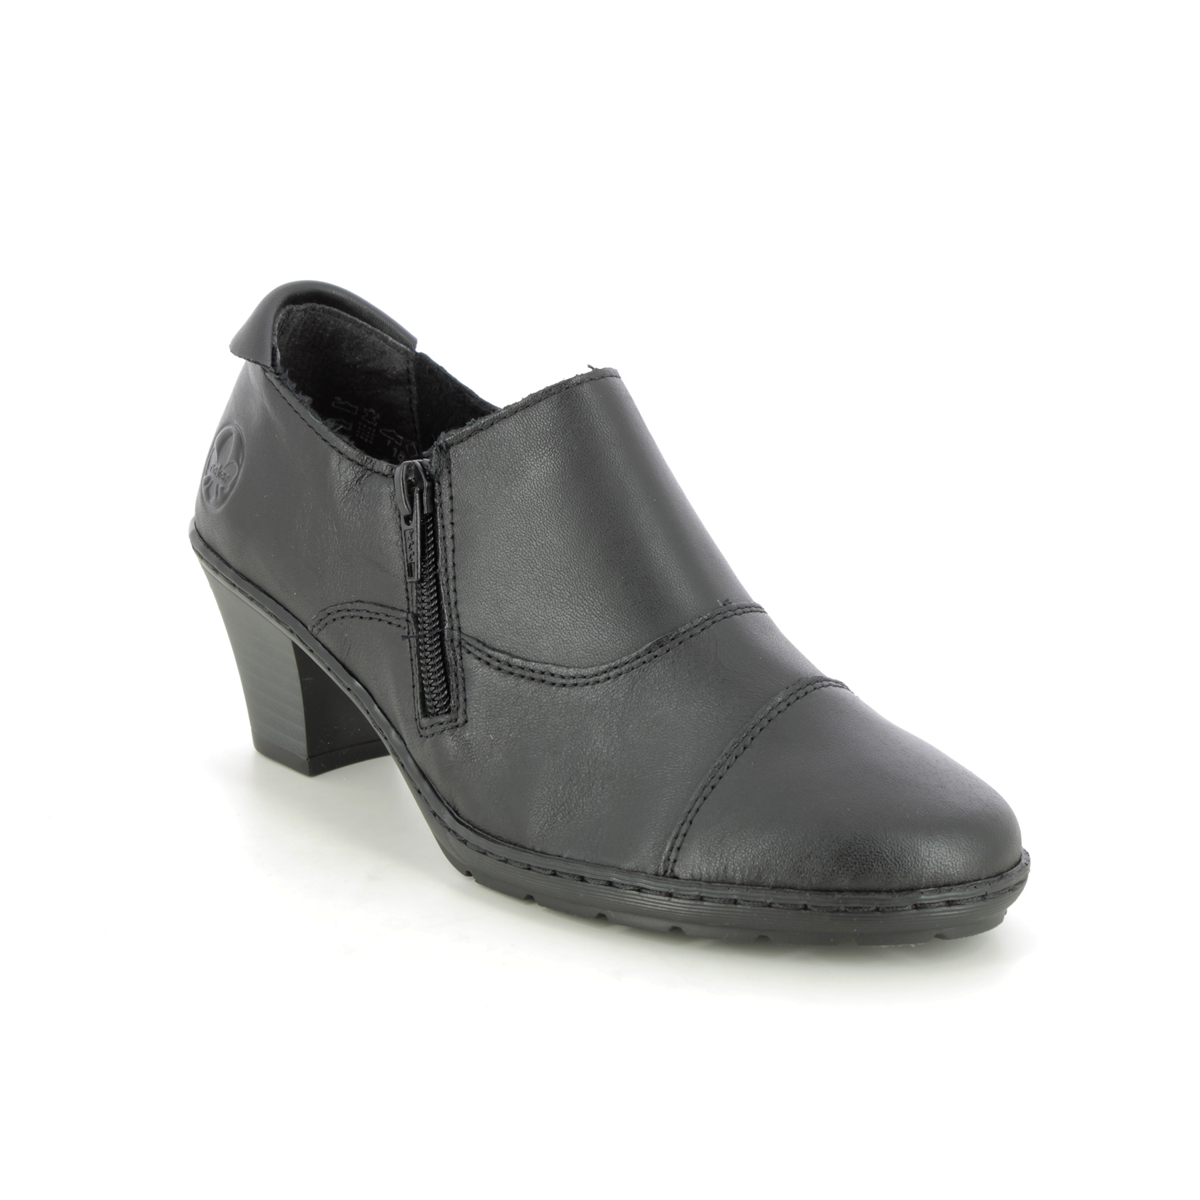 Rieker Addicap Black Leather Womens Shoe-Boots 57173-02 In Size 36 In Plain Black Leather